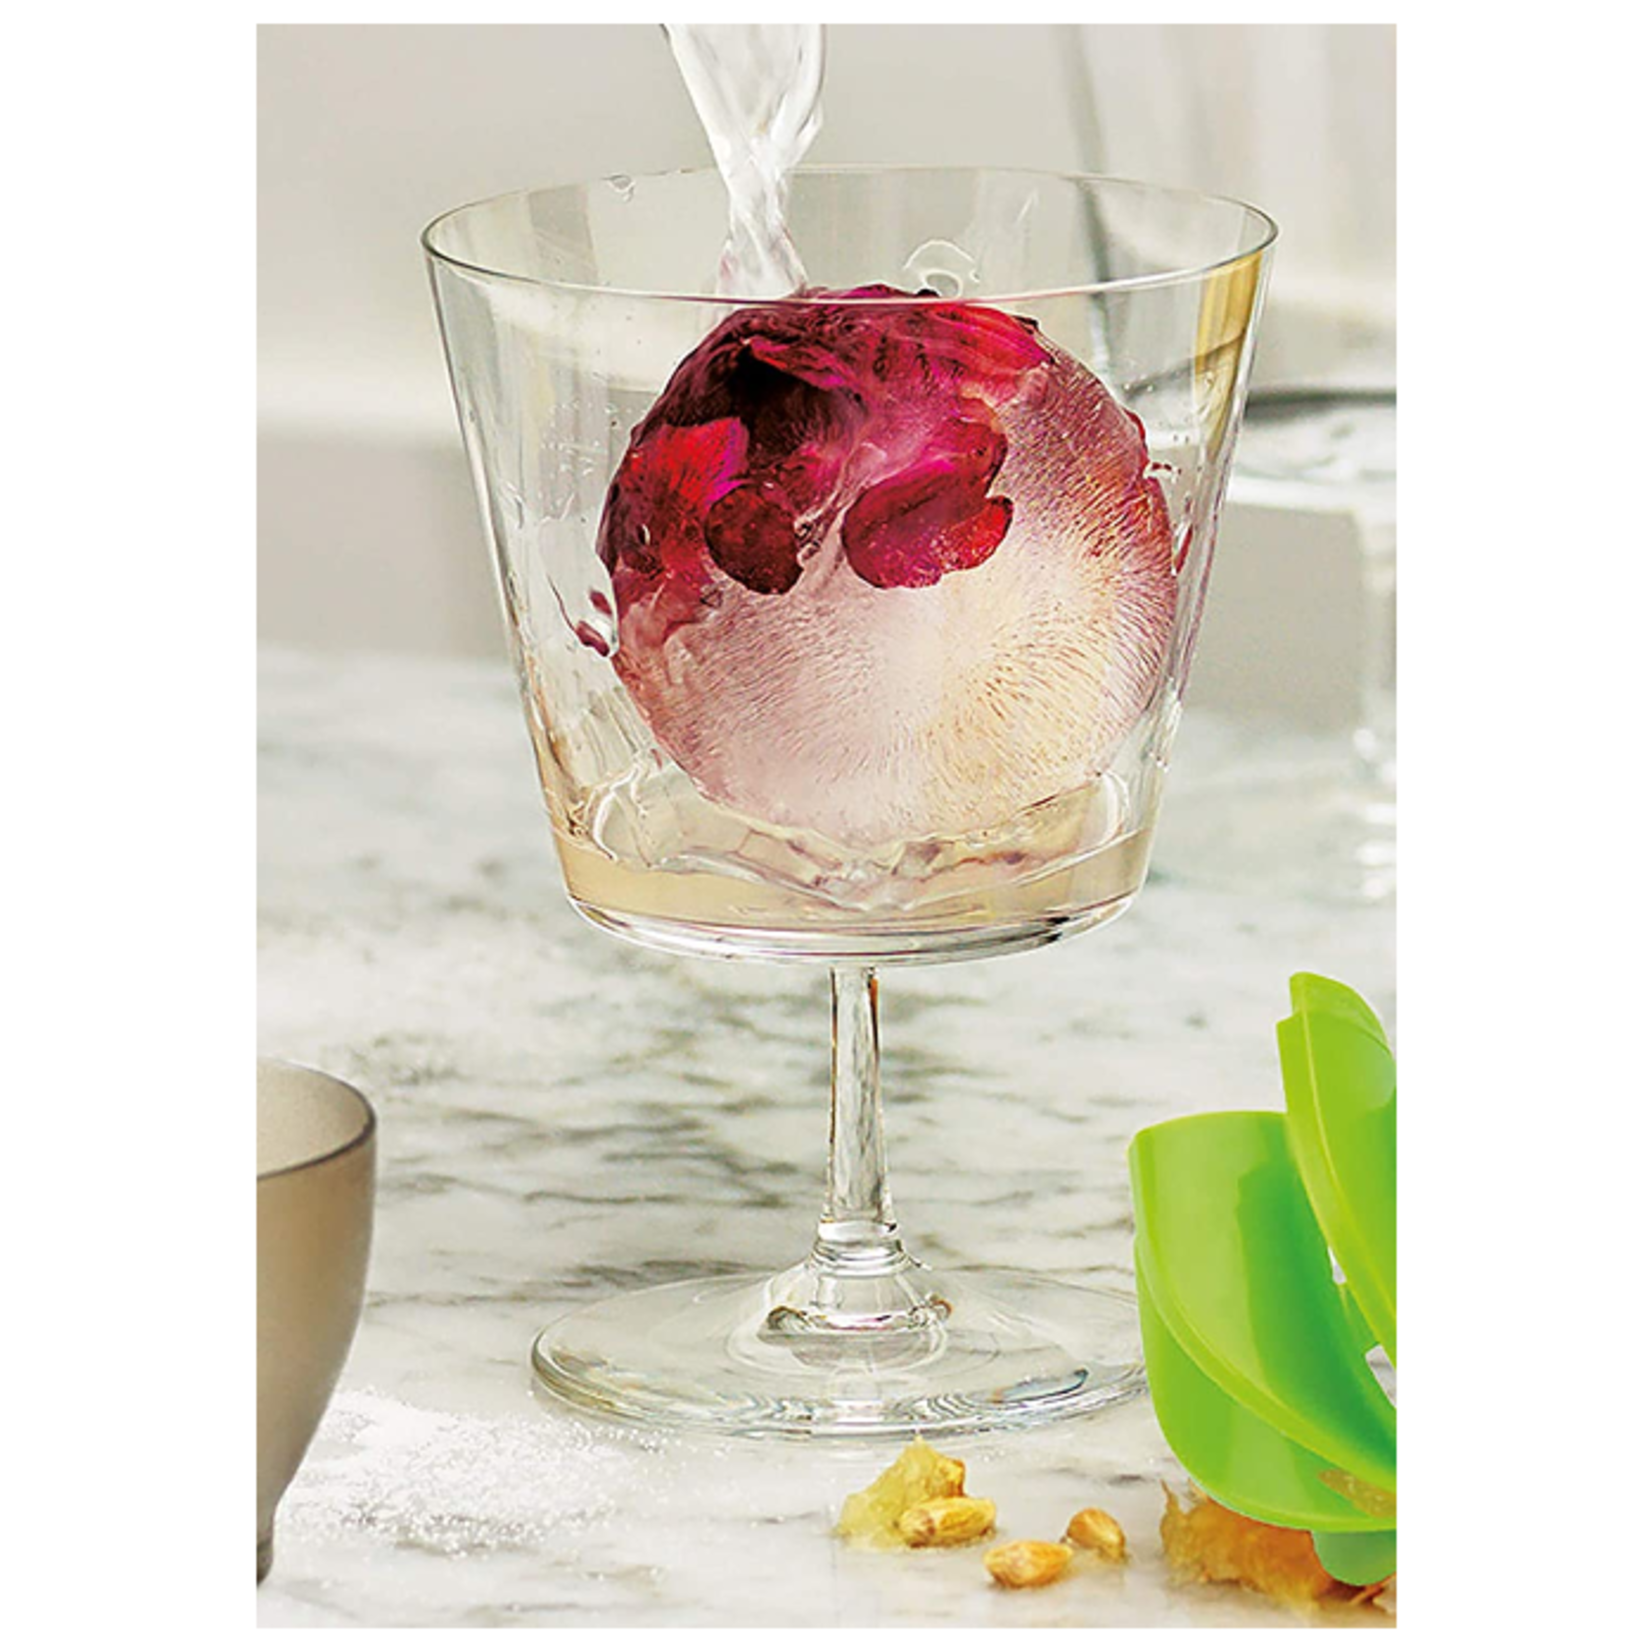 Tovolo Sphere Ice Molds - Set of 4